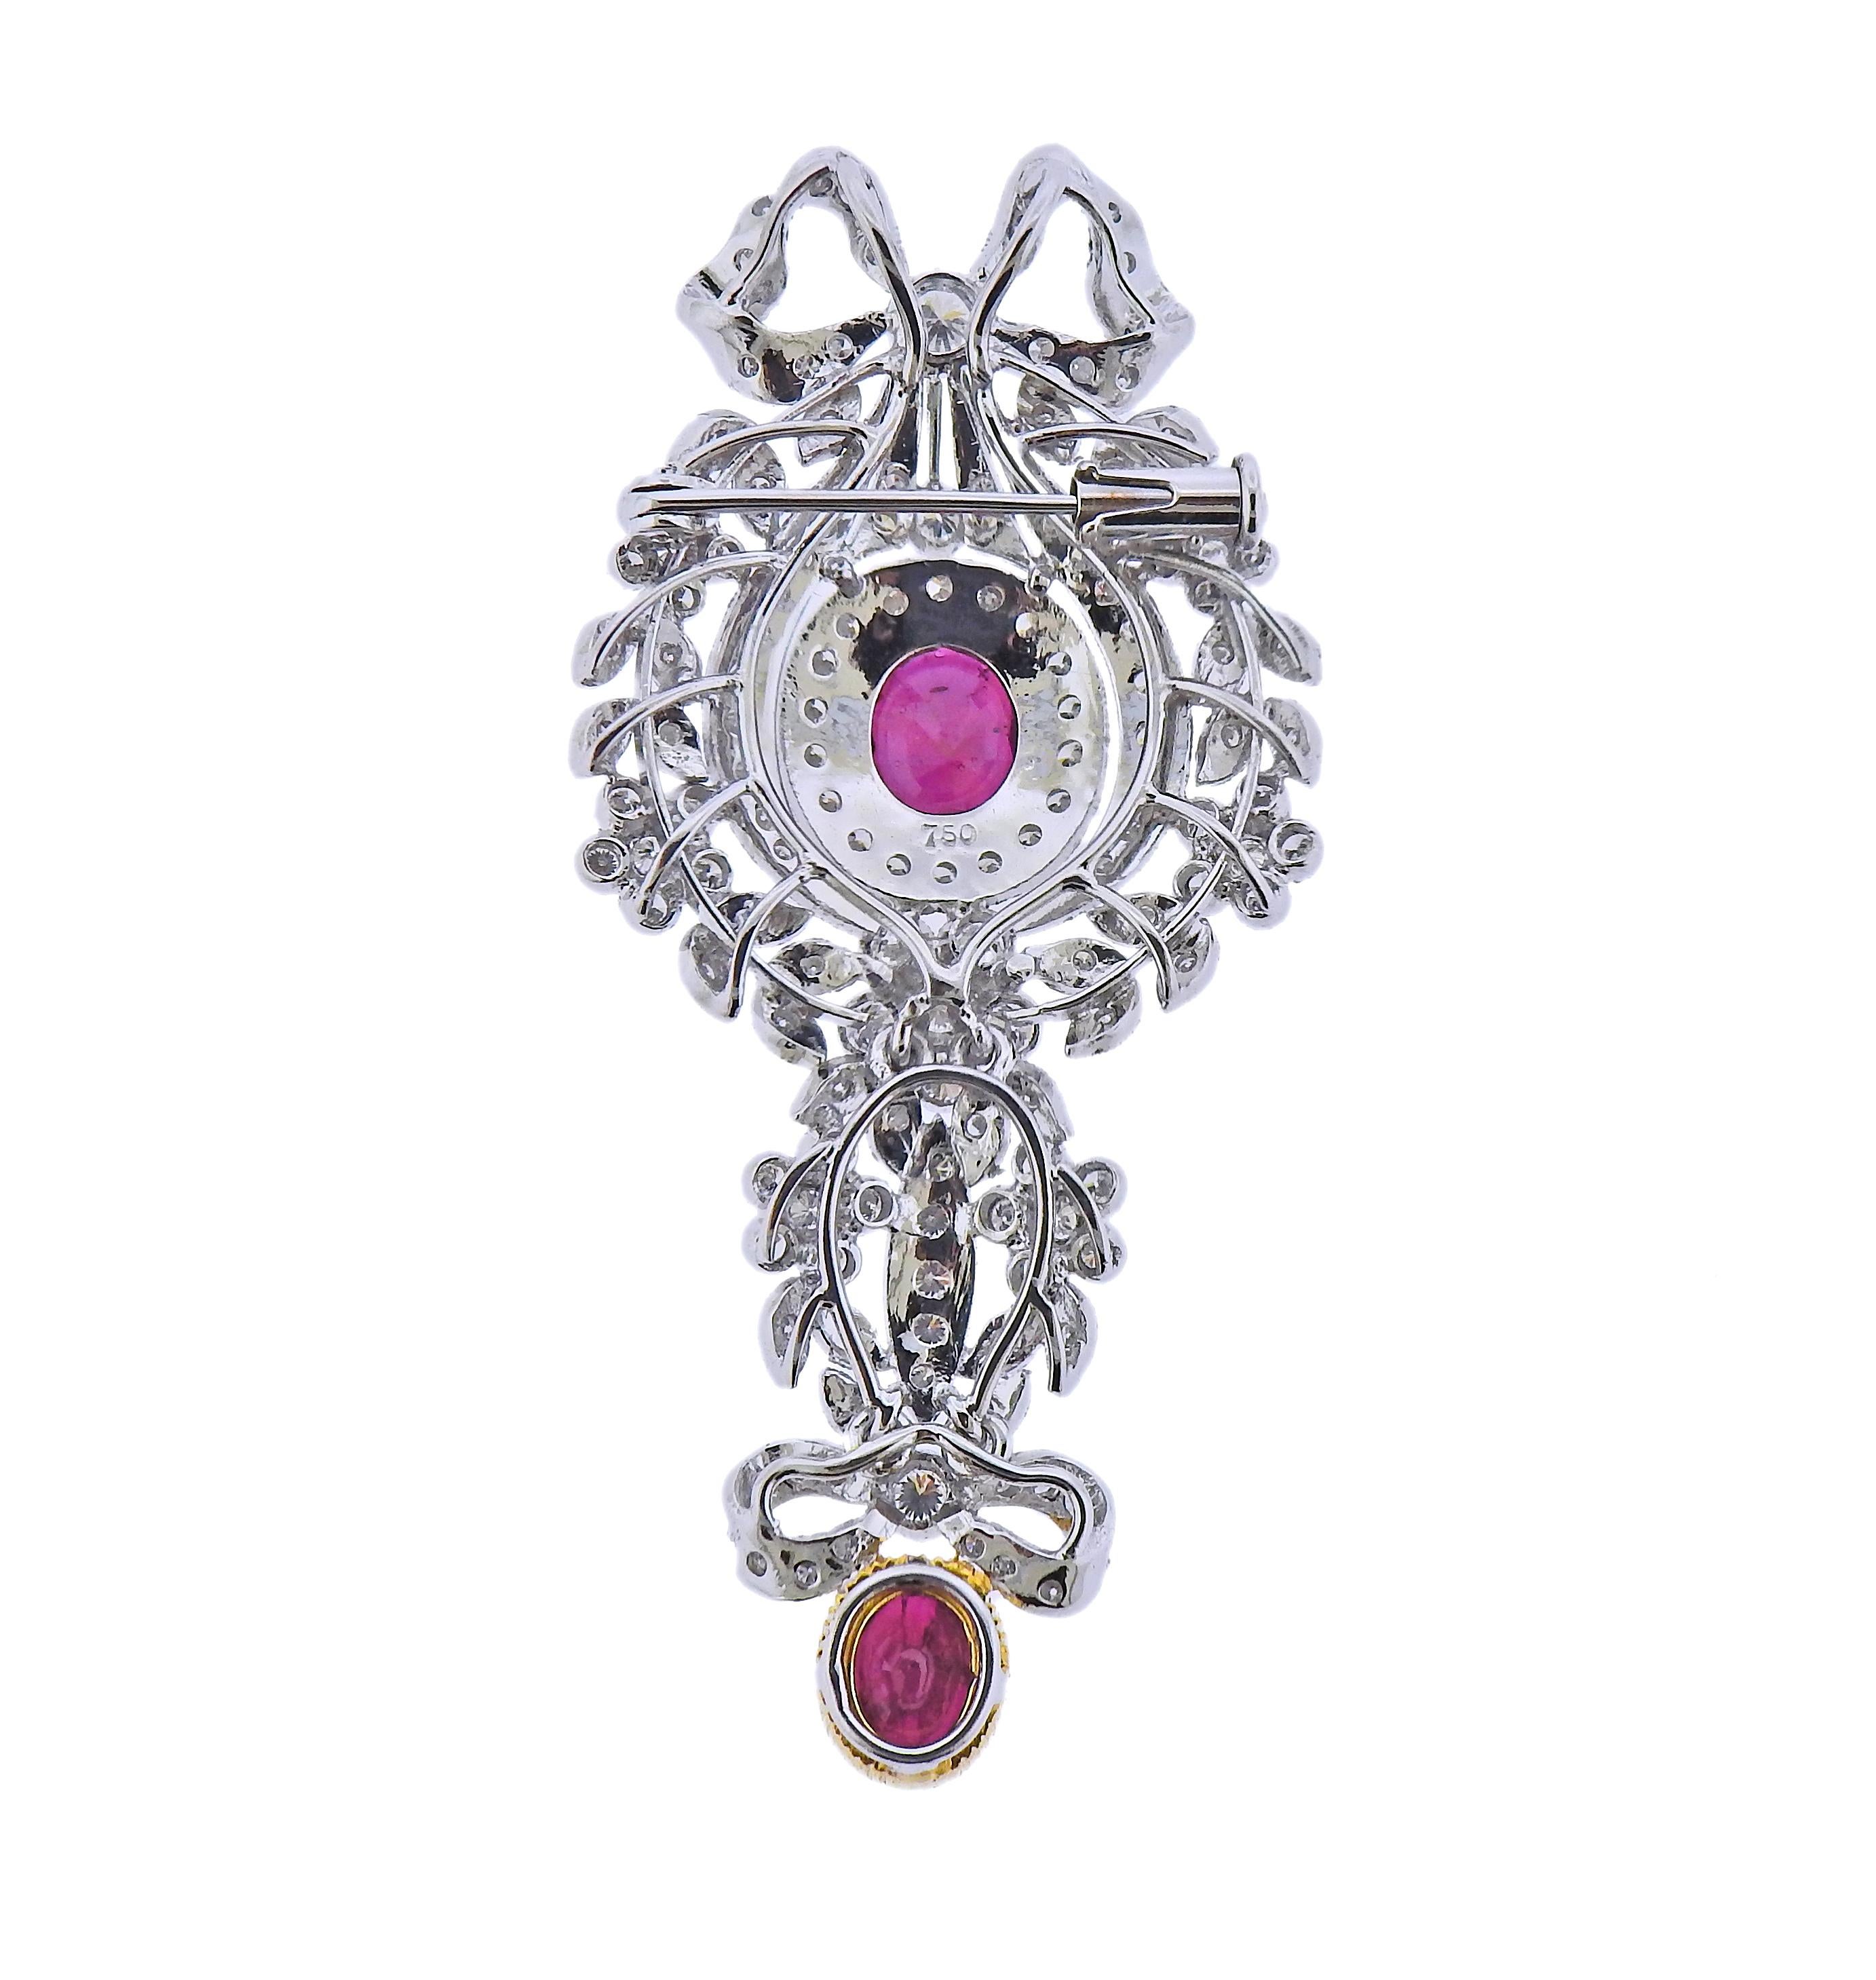 18k white and yellow gold pendant brooch, set with two rubies and apron. 0.90ctw in diamonds. Brooch is 56mm x 28mm. Marked 750. weight - 12 grams.